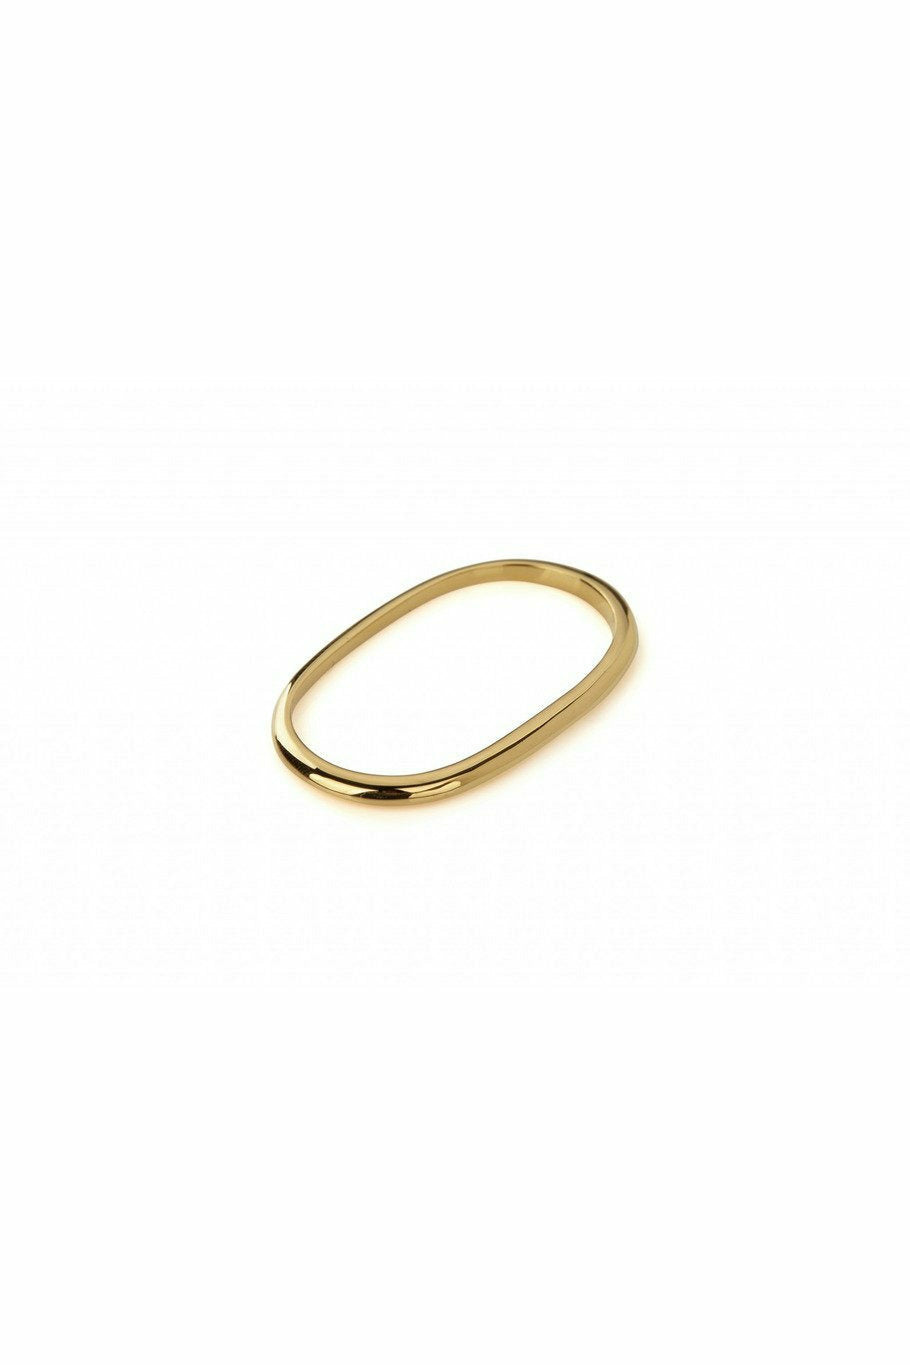 Pure Double Ring - Gold JTL4019-PDR-GOLD